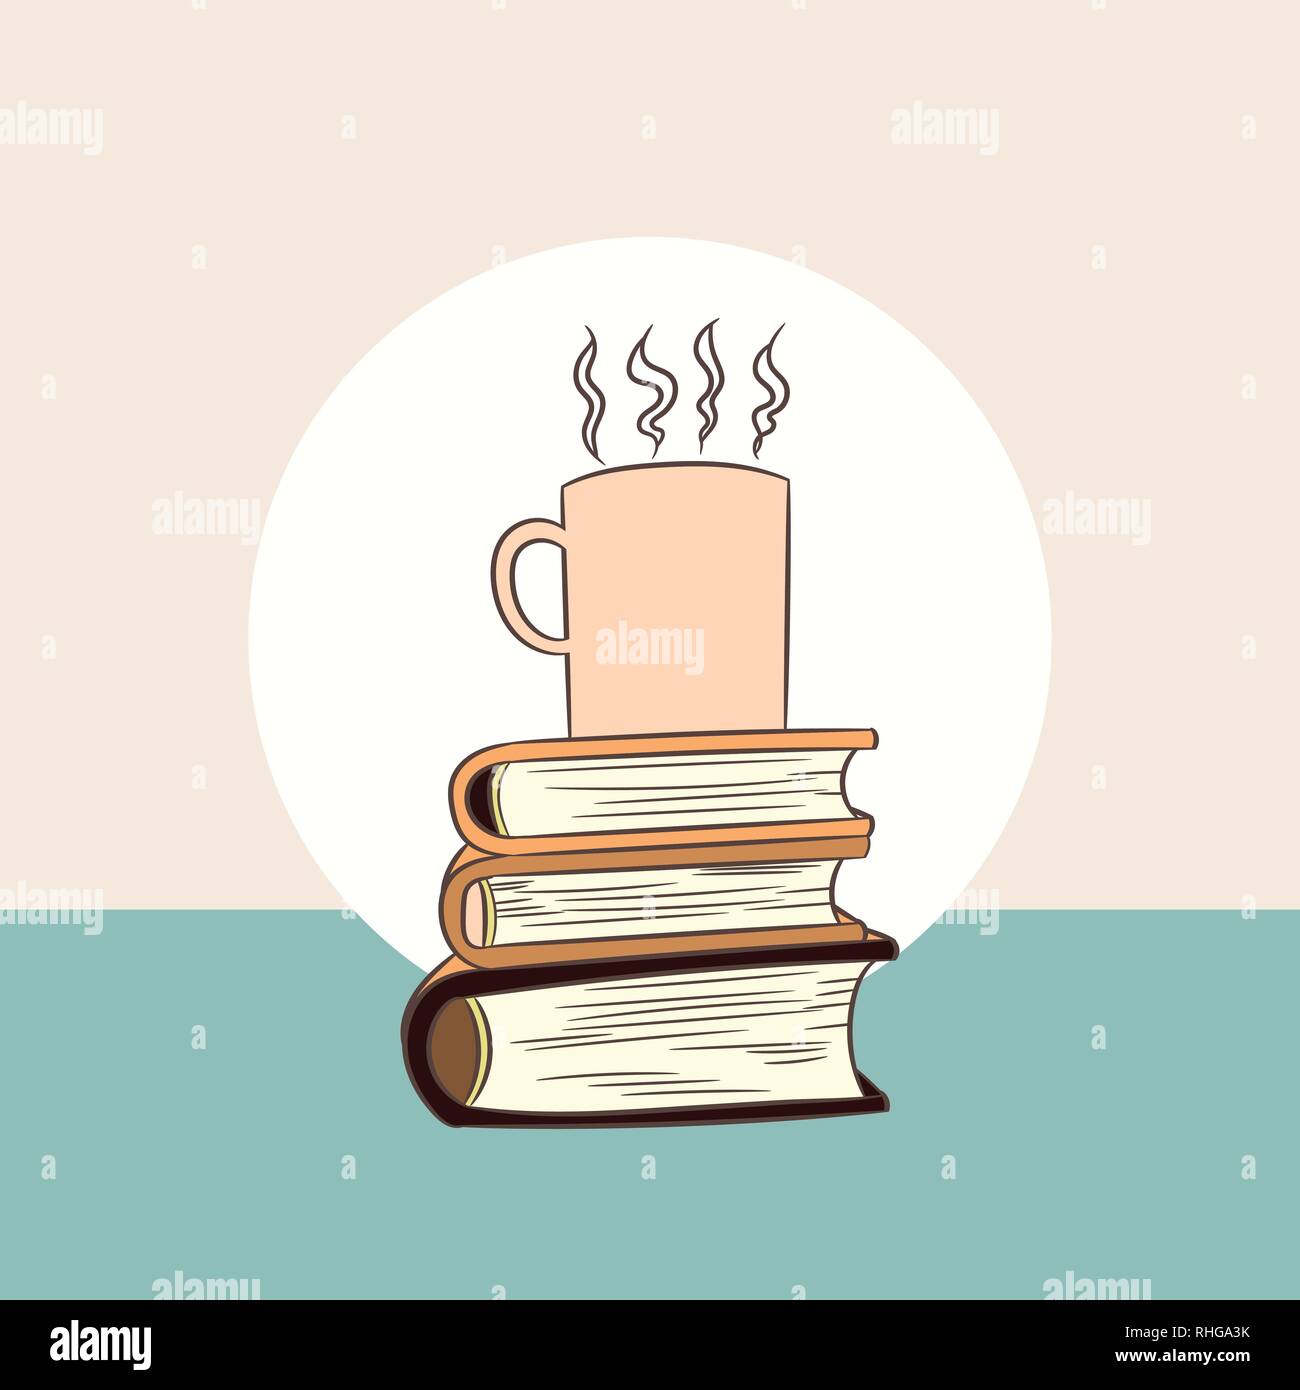 Hot coffee in cub on books, for banner, poster, food and drinks, business concept. Vecter Illustration Stock Vector